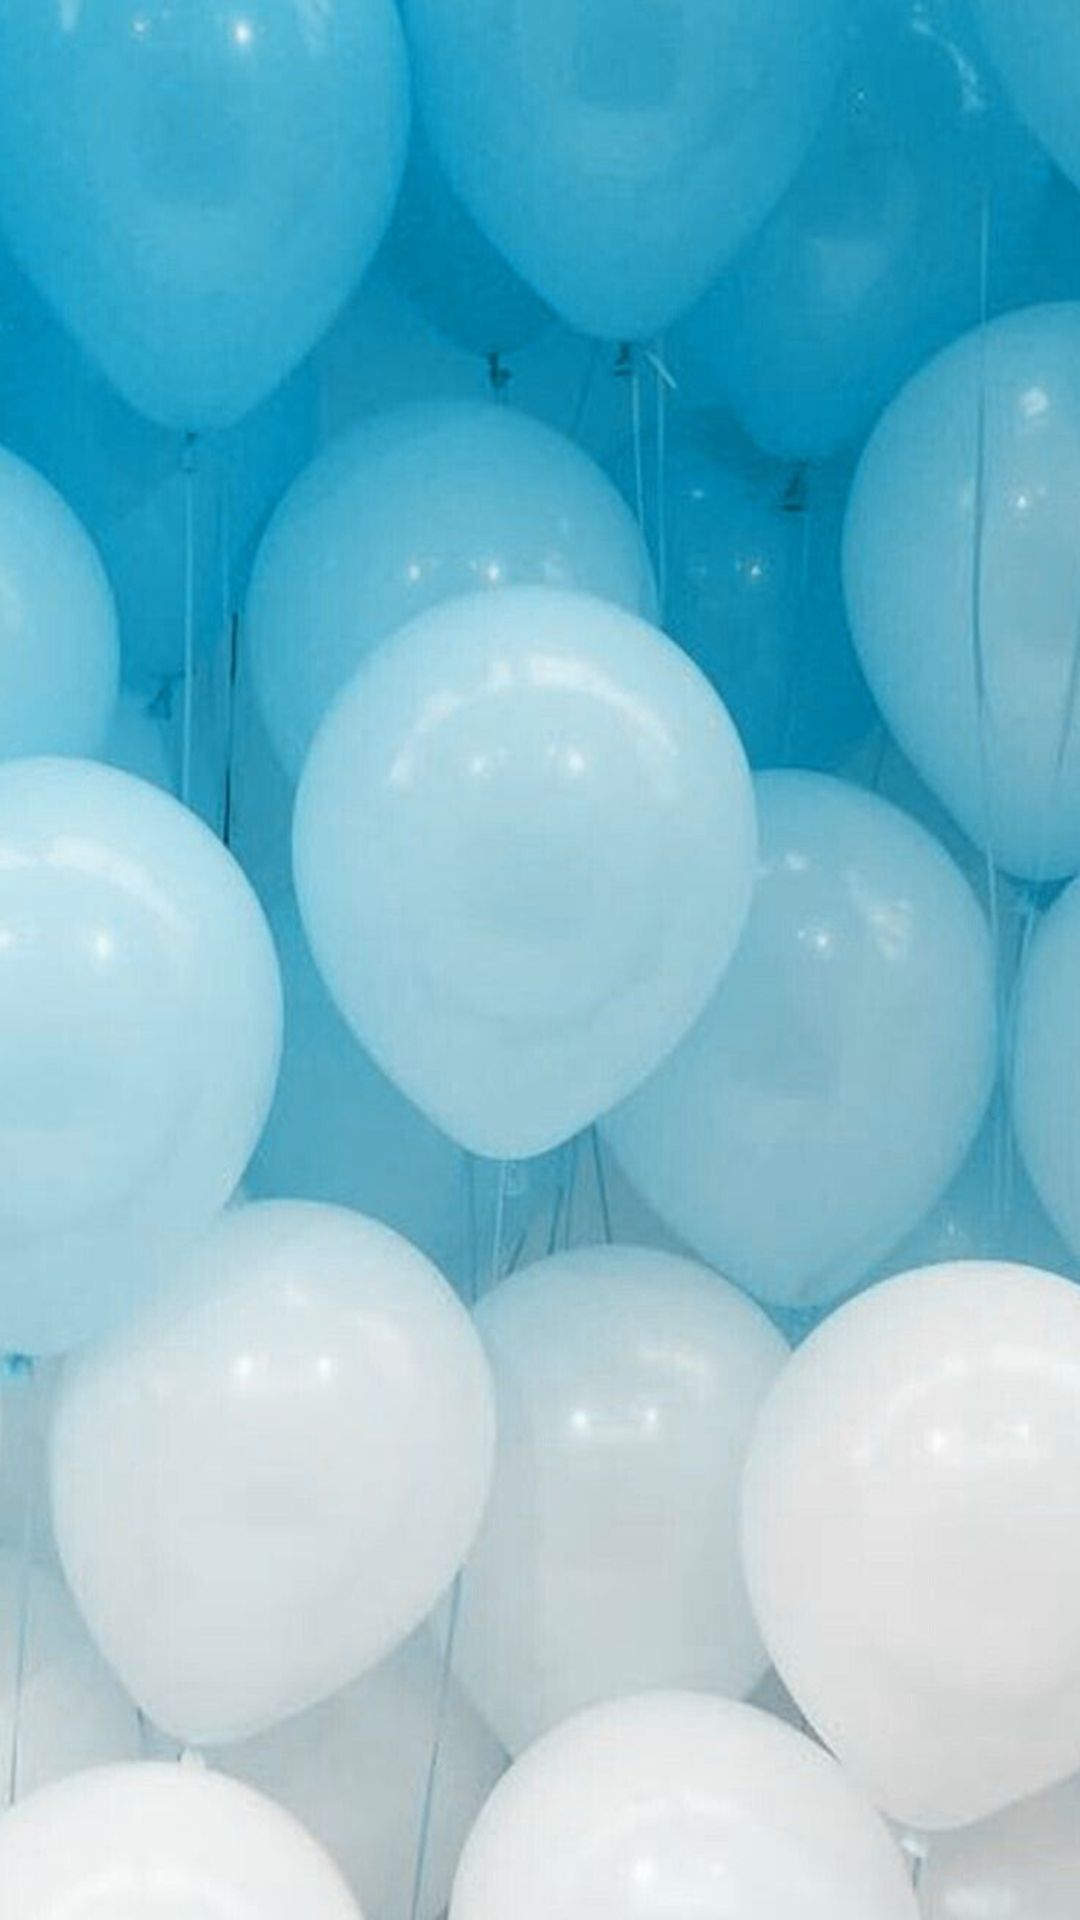 A close up of many blue and white balloons - Blue, pastel blue, balloons